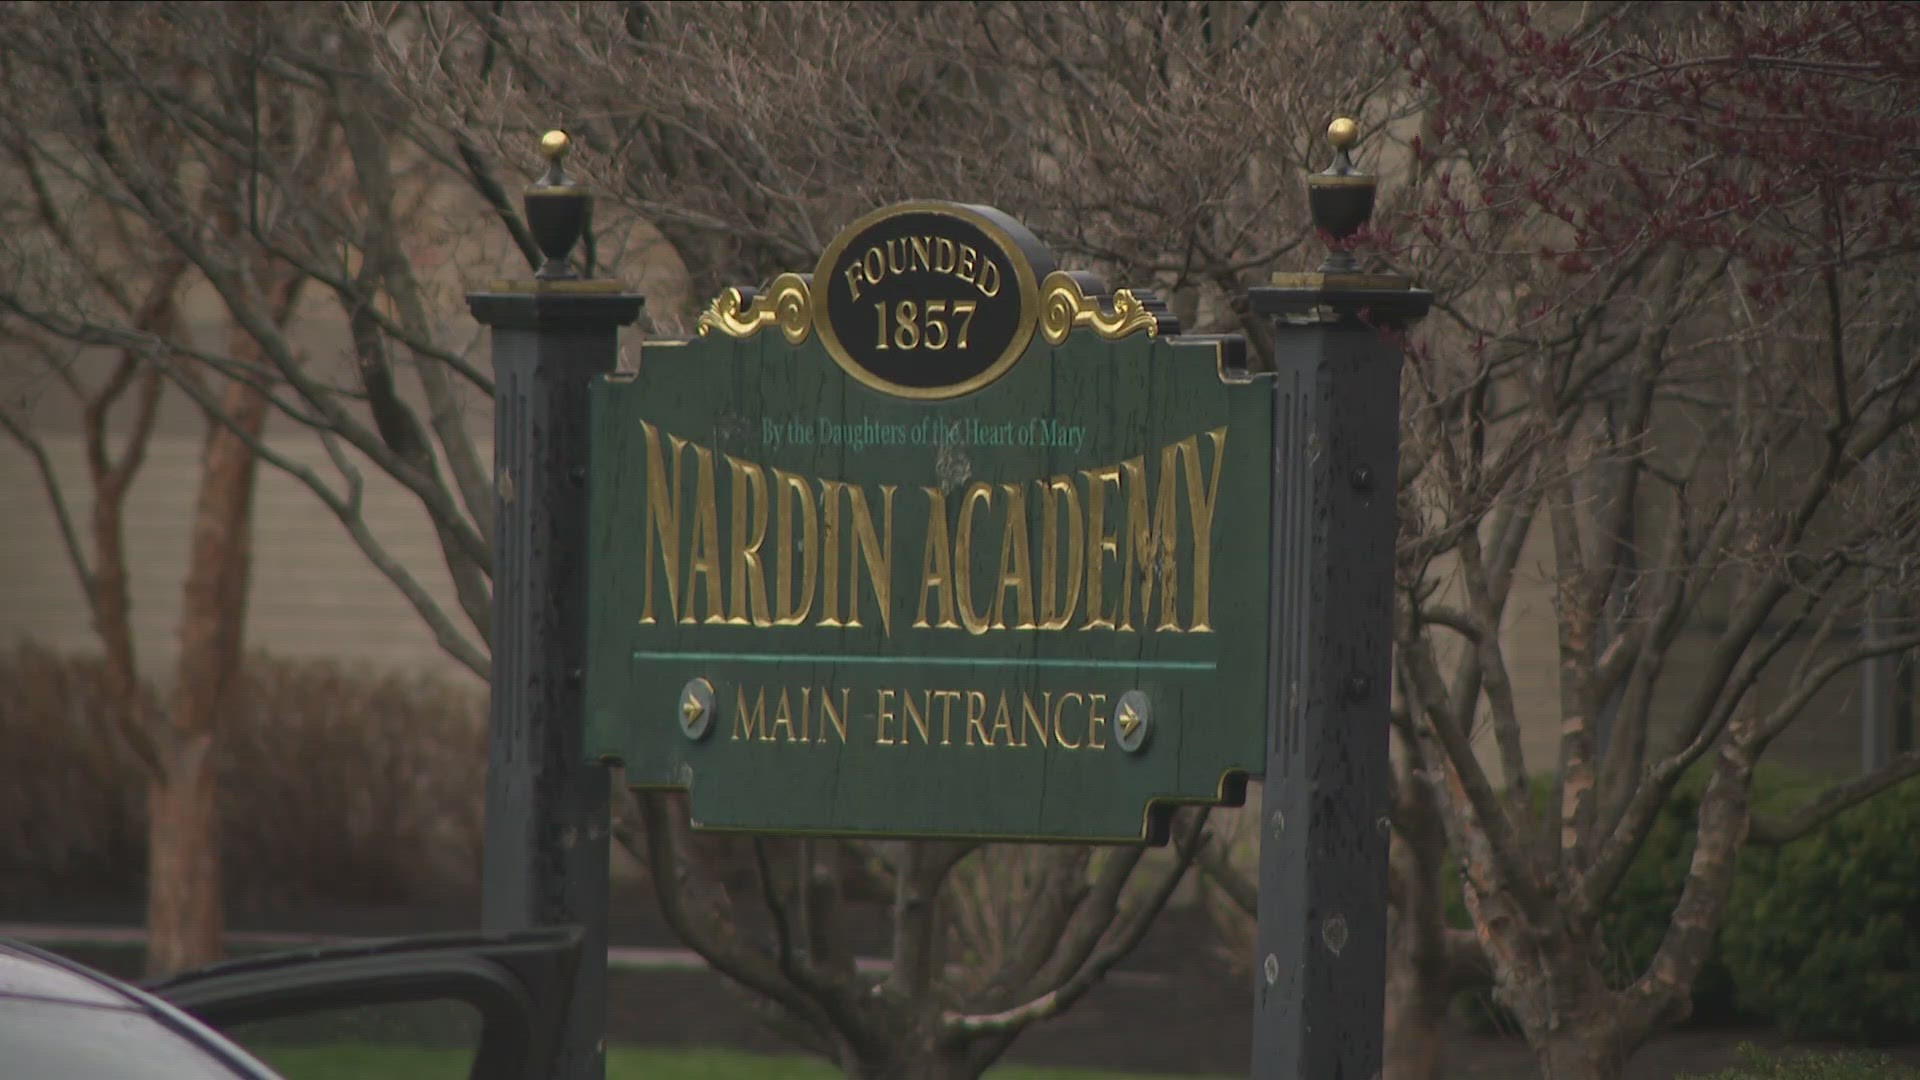 Nardin students continue to demonstrate their displeasure with the academy's leadership